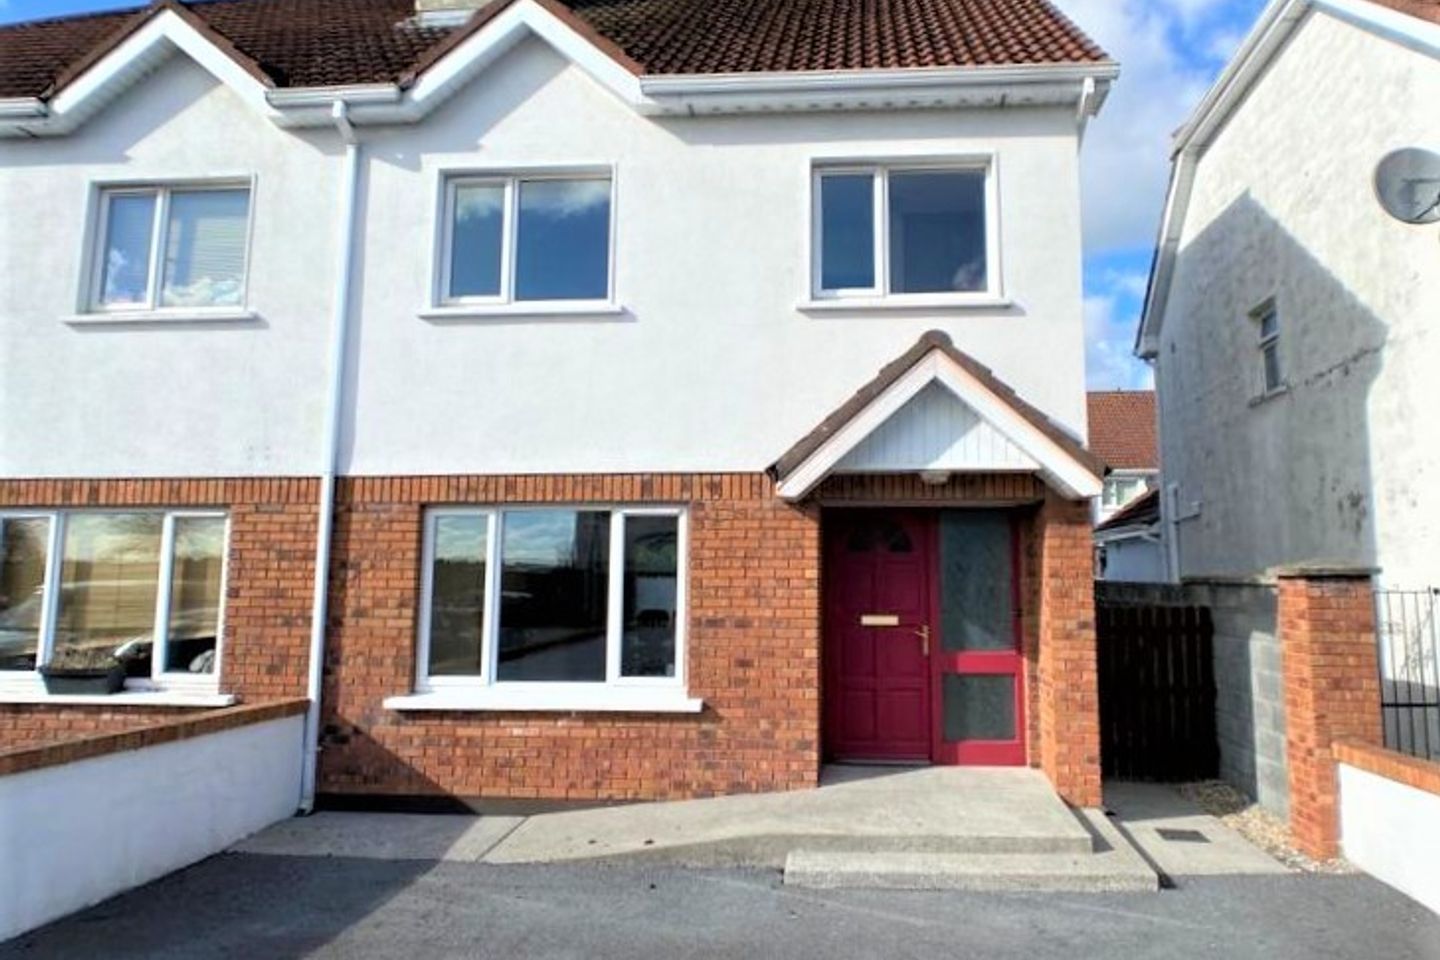 80 Woodfield, Galway Road, Tuam, Co. Galway